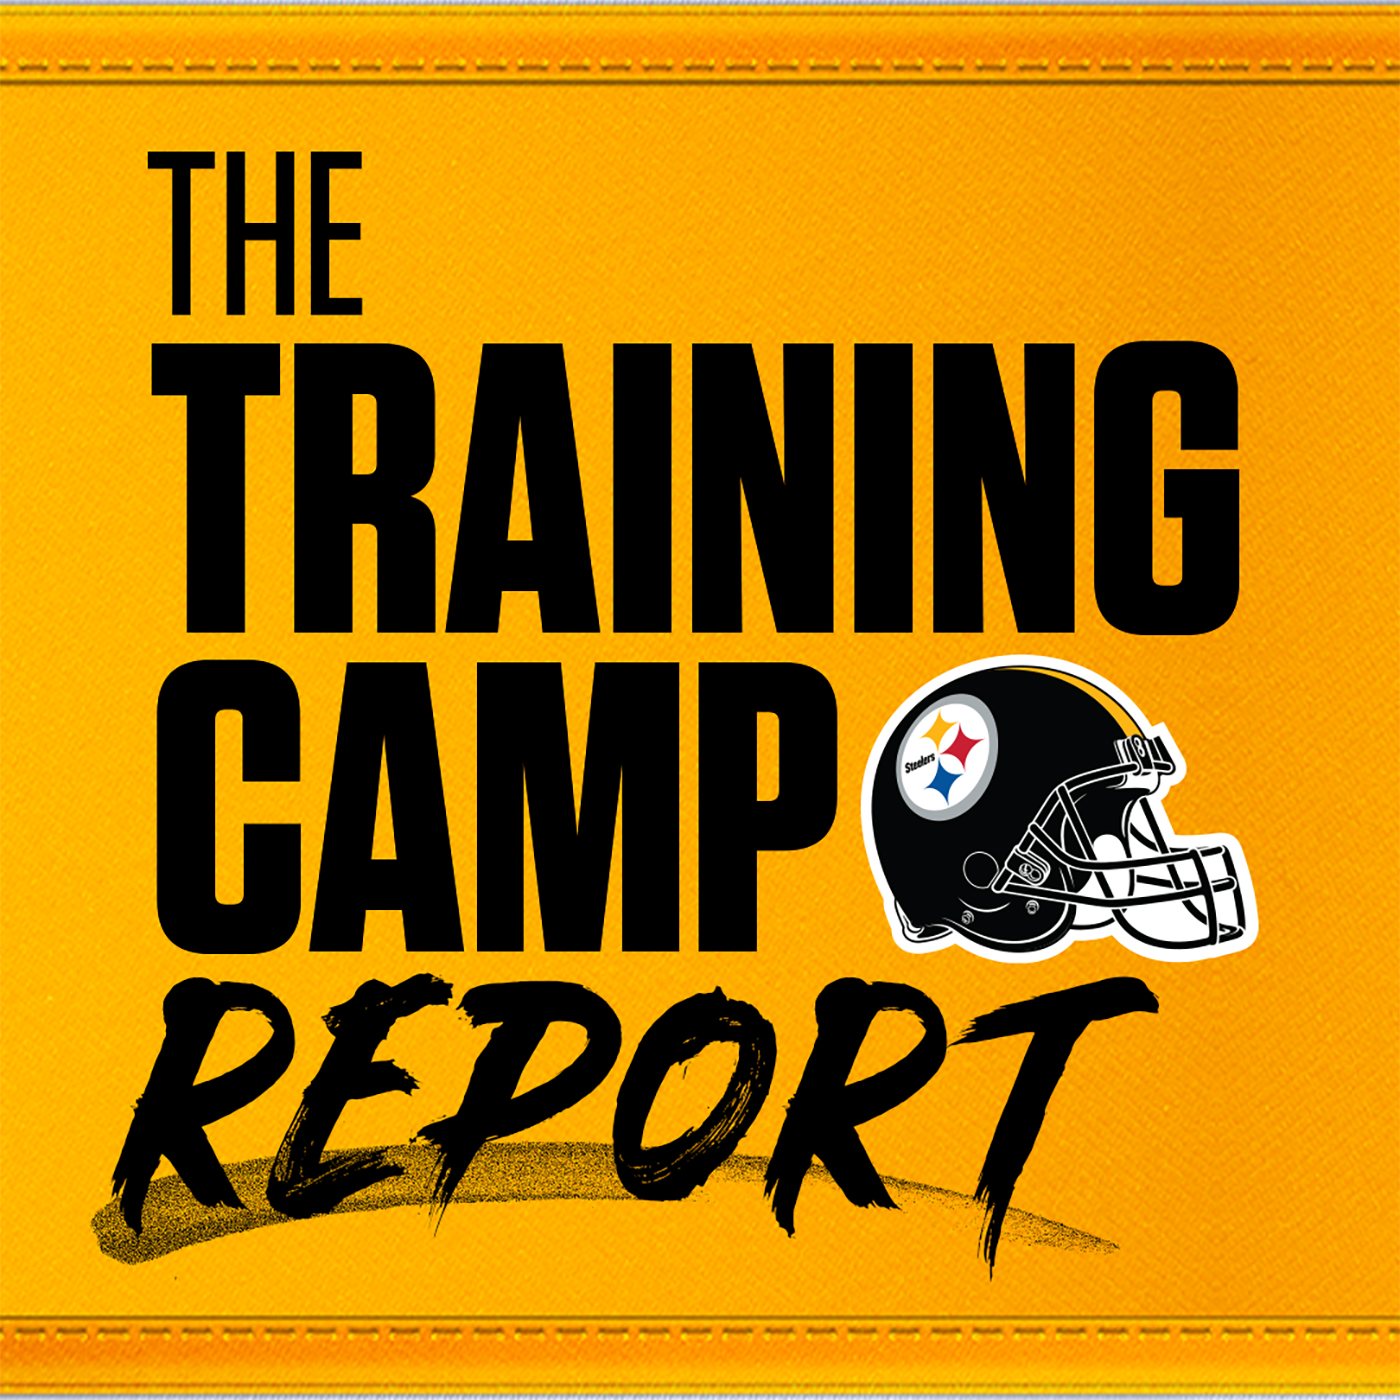 The Training Camp Report - Day 1